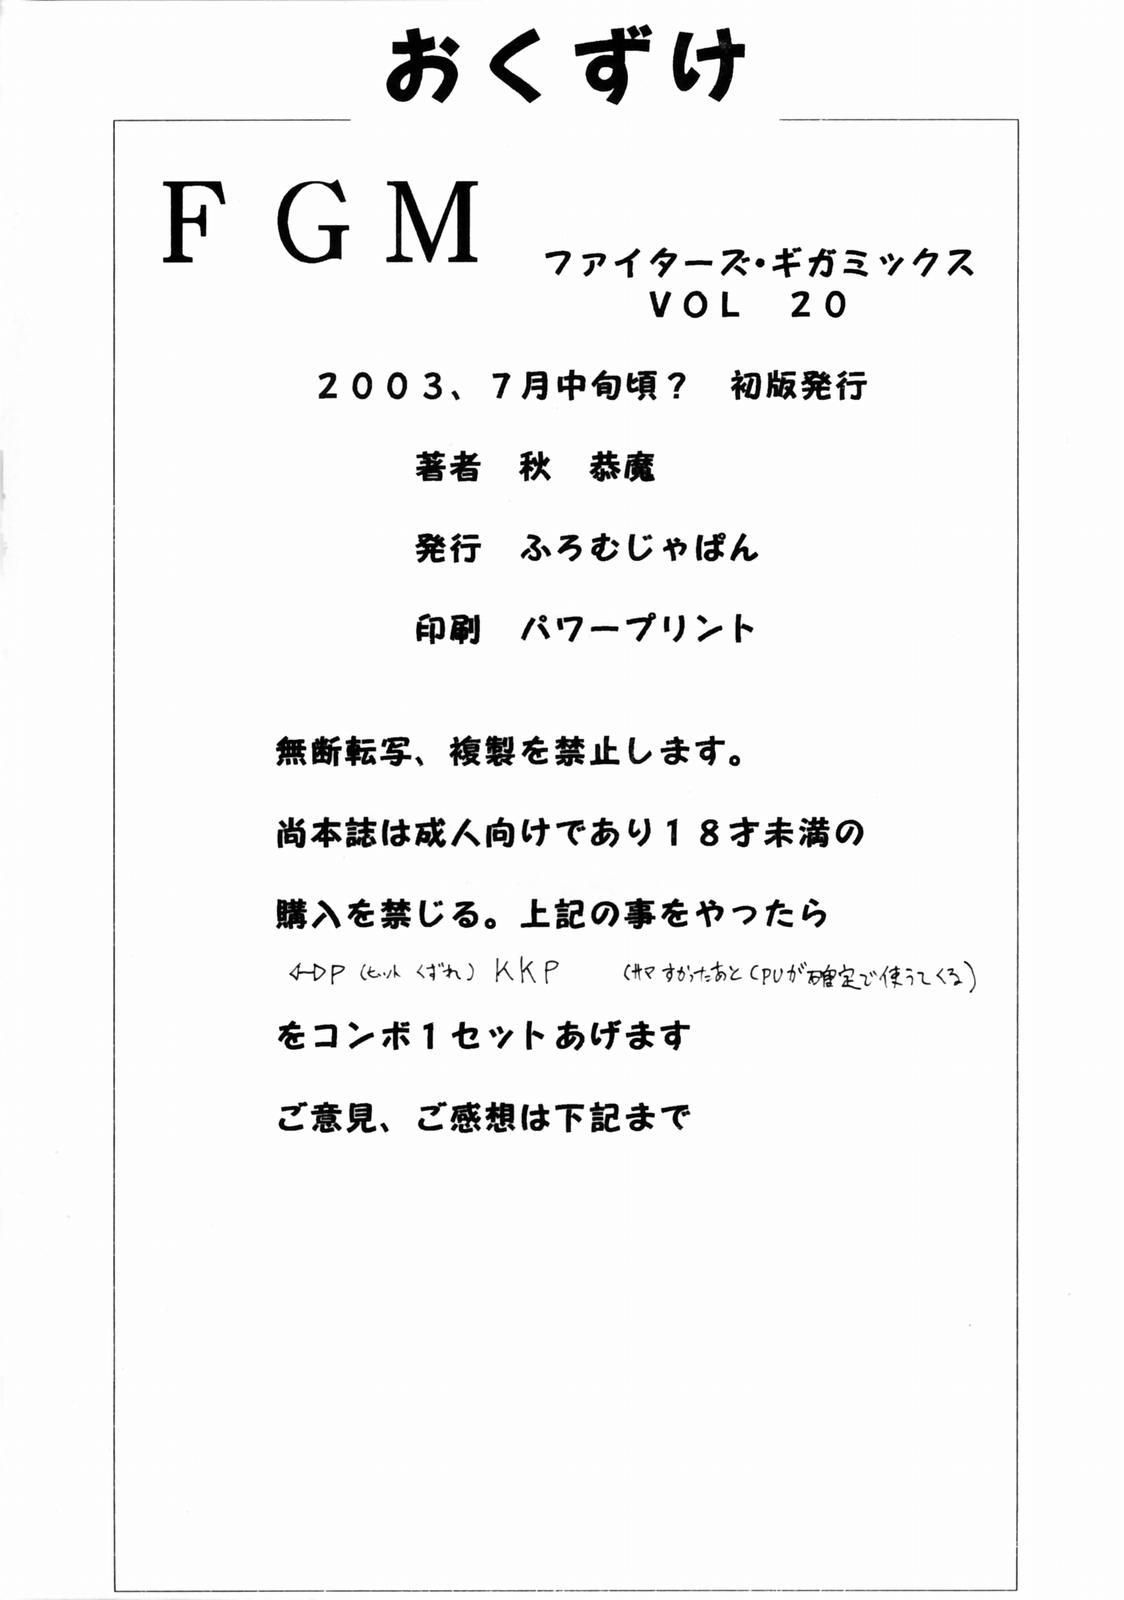 FIGHTERS GIGAMIX Vol. 20 56